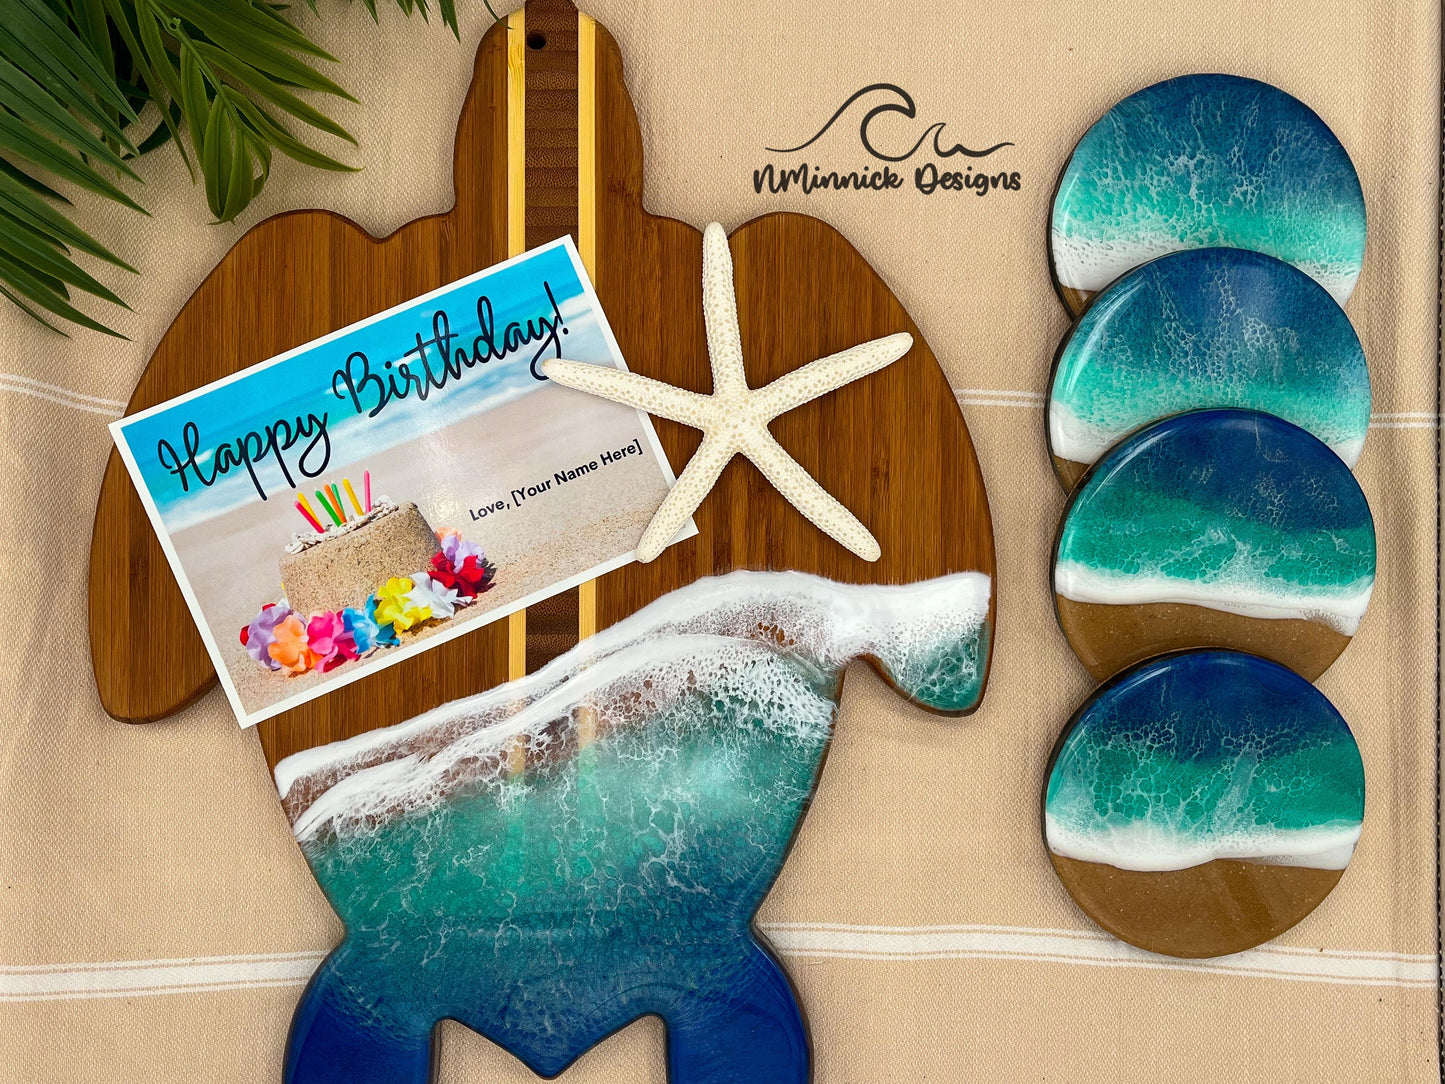 Sea turtle-shaped bamboo serving board covered in aoi hi blue and okinawa green ocean resin art to resemble waves of the ocean.  Matching set of 4 drink coasters with matching colored ocean resin scenes and cork backings.  Includes a Happy Birthday Card.